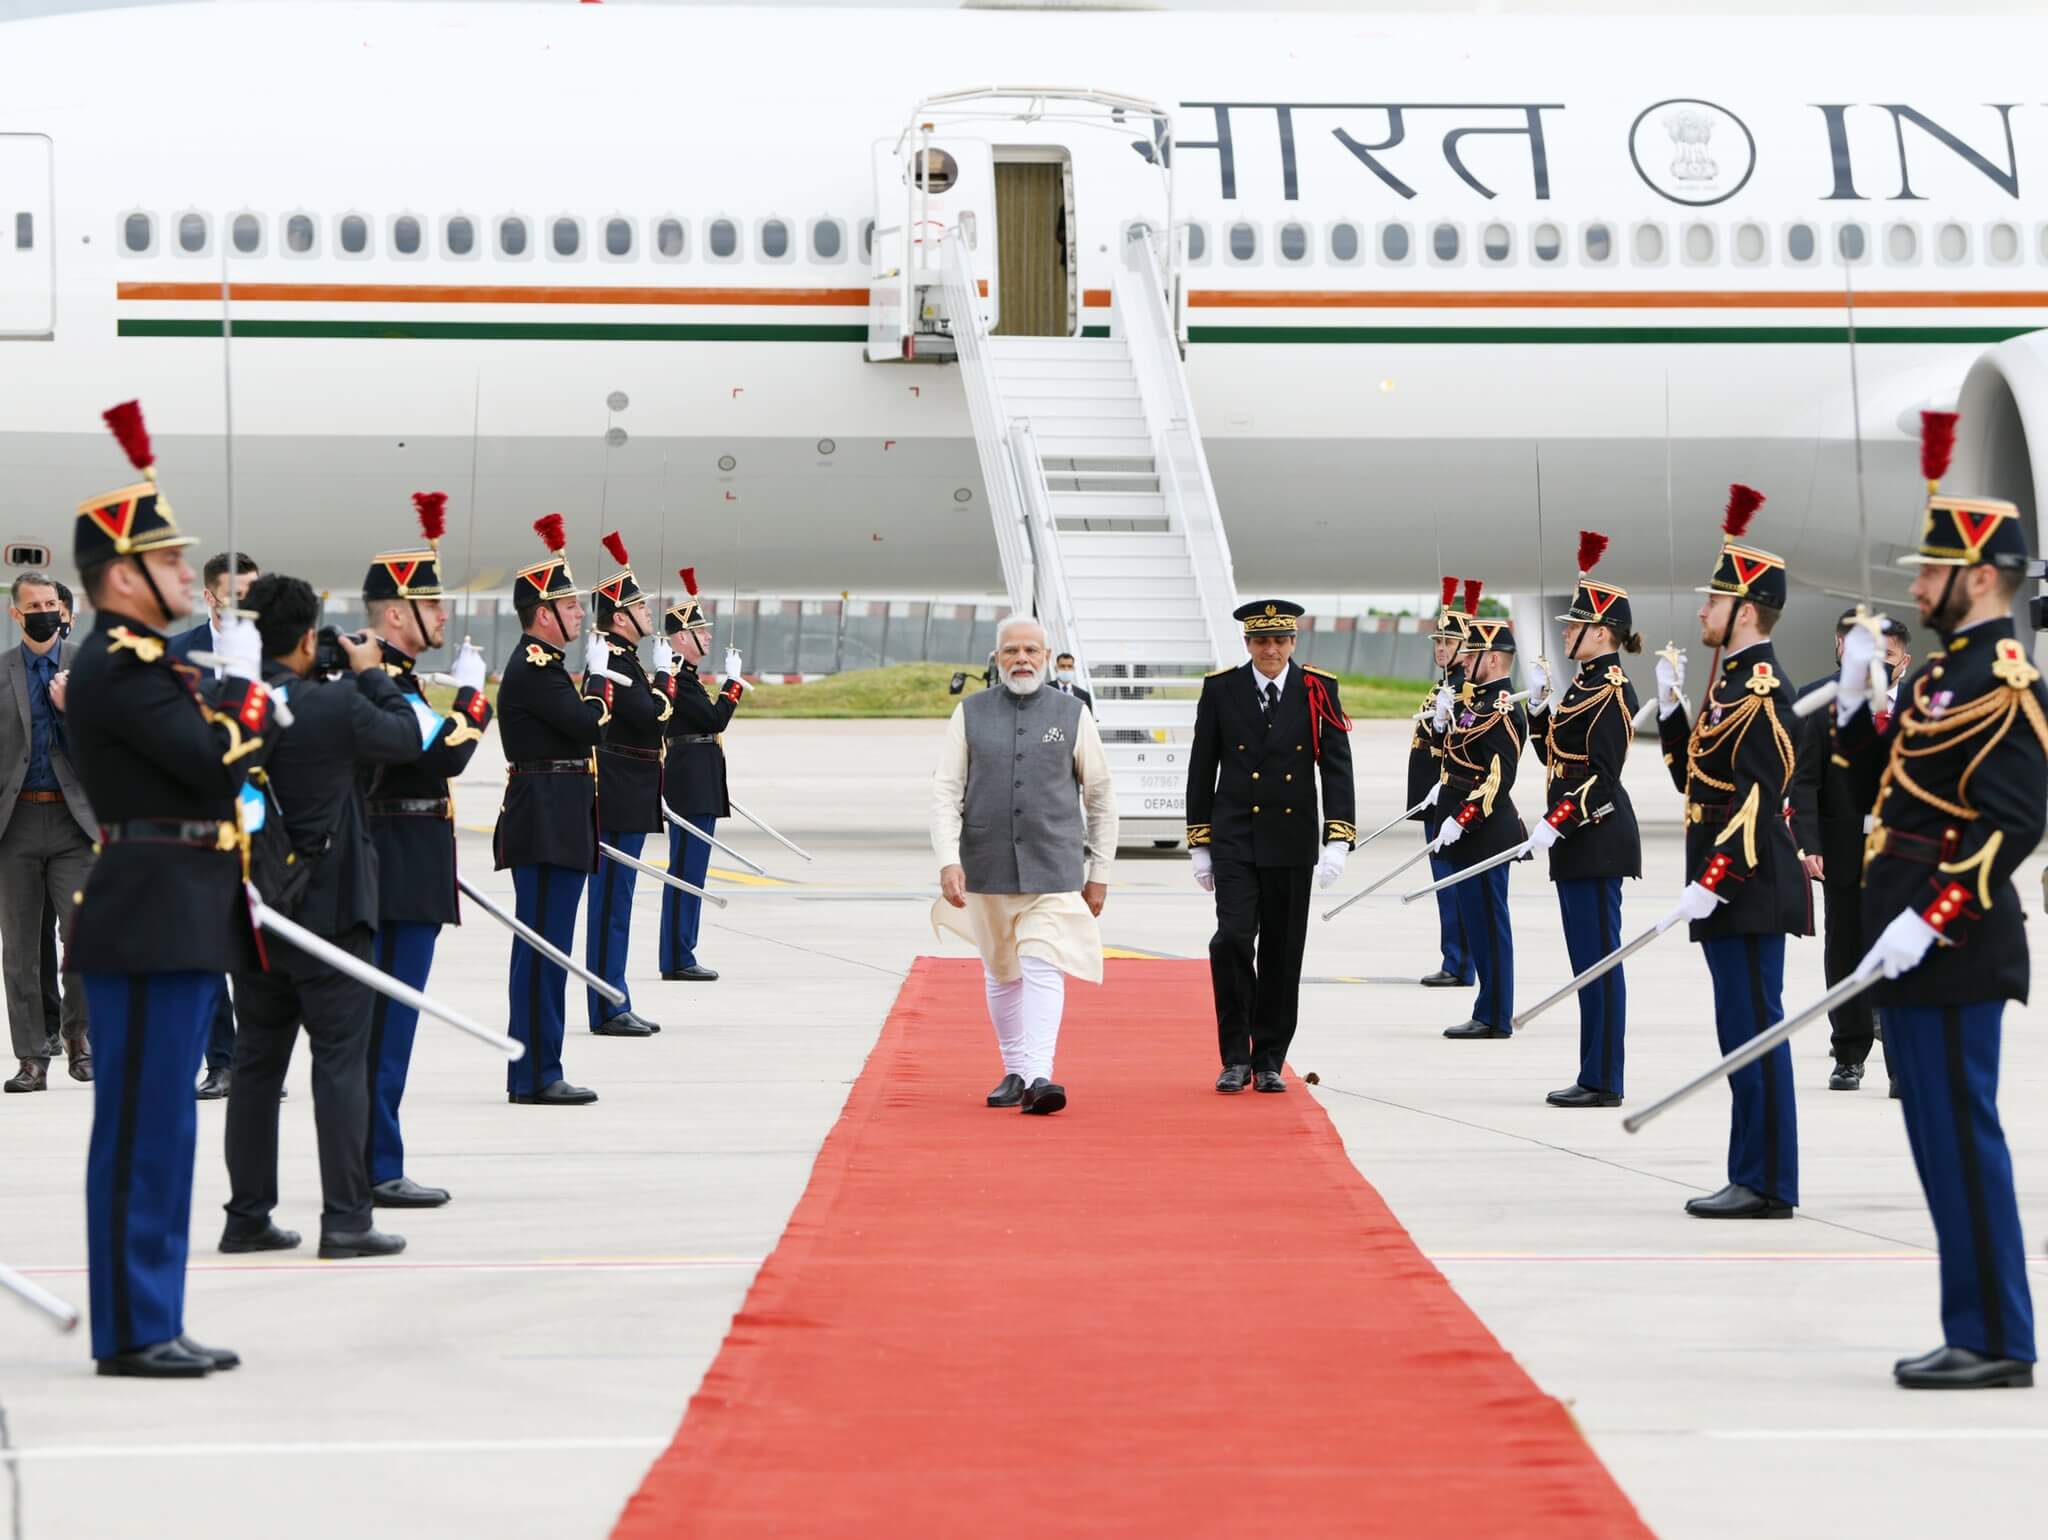 India’s Transformational Diplomatic Leap into Europe